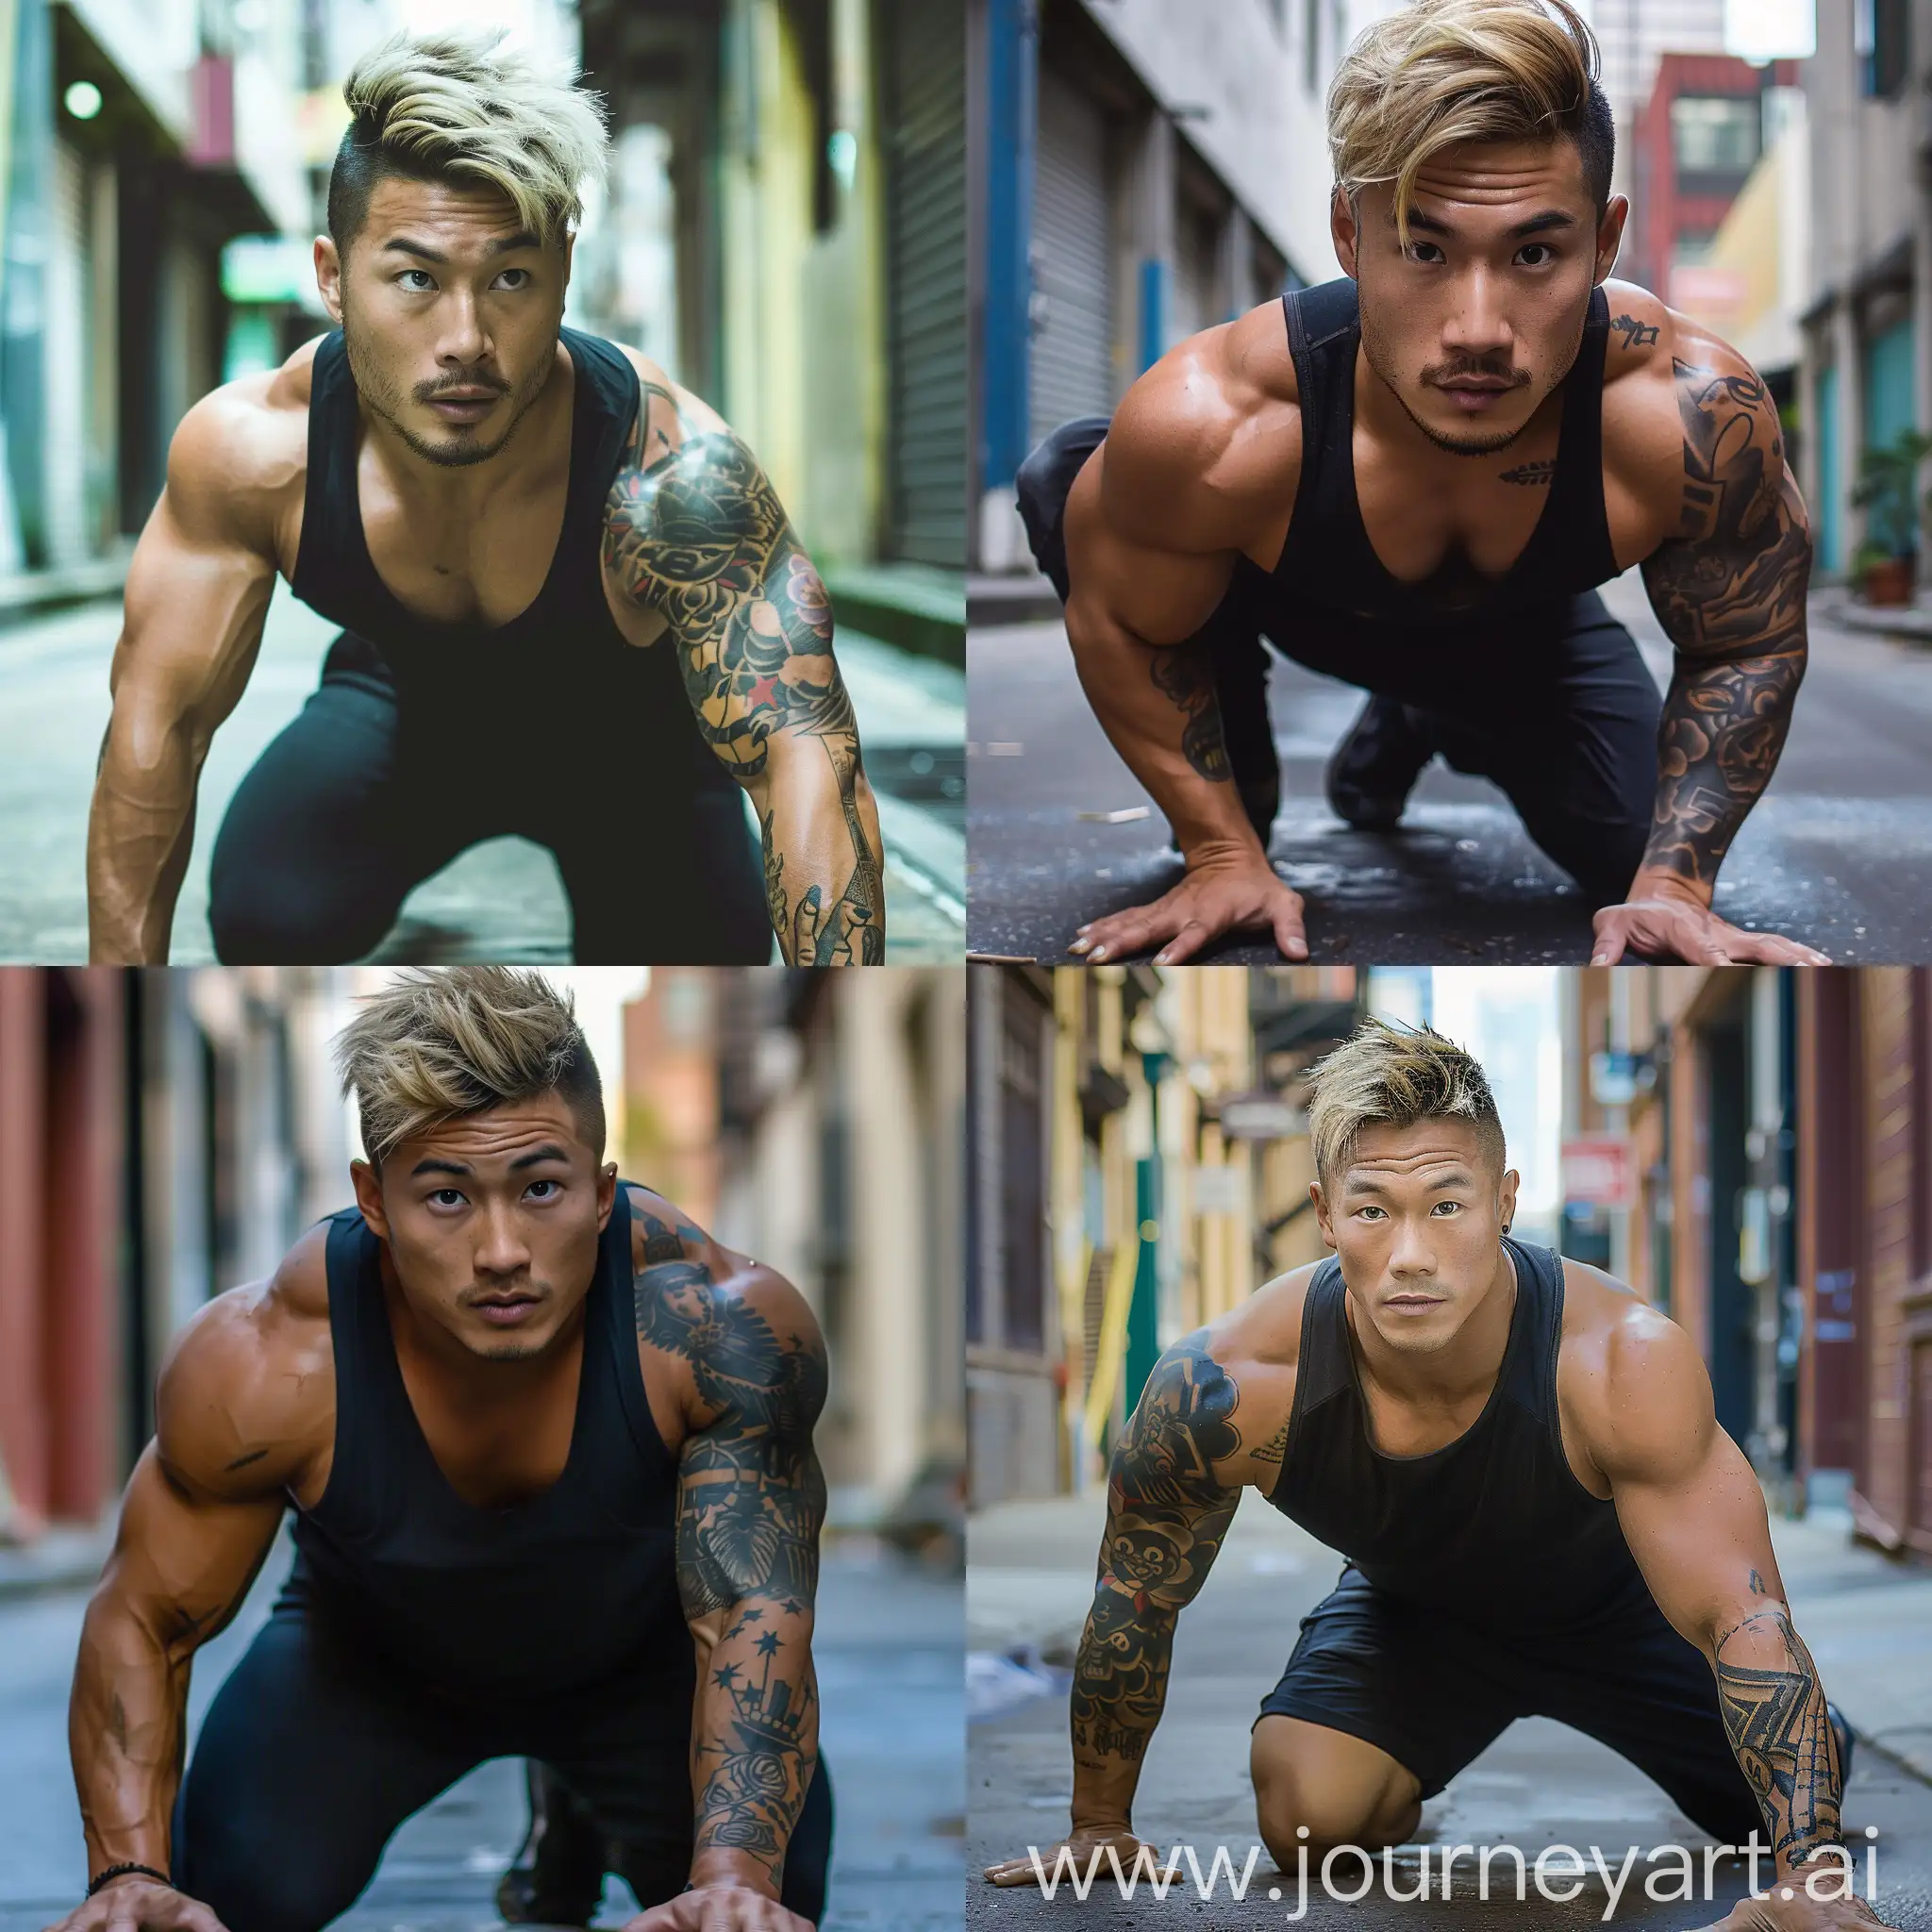 Muscular-Asian-Man-with-Blond-Hair-Crawling-in-Urban-Alley